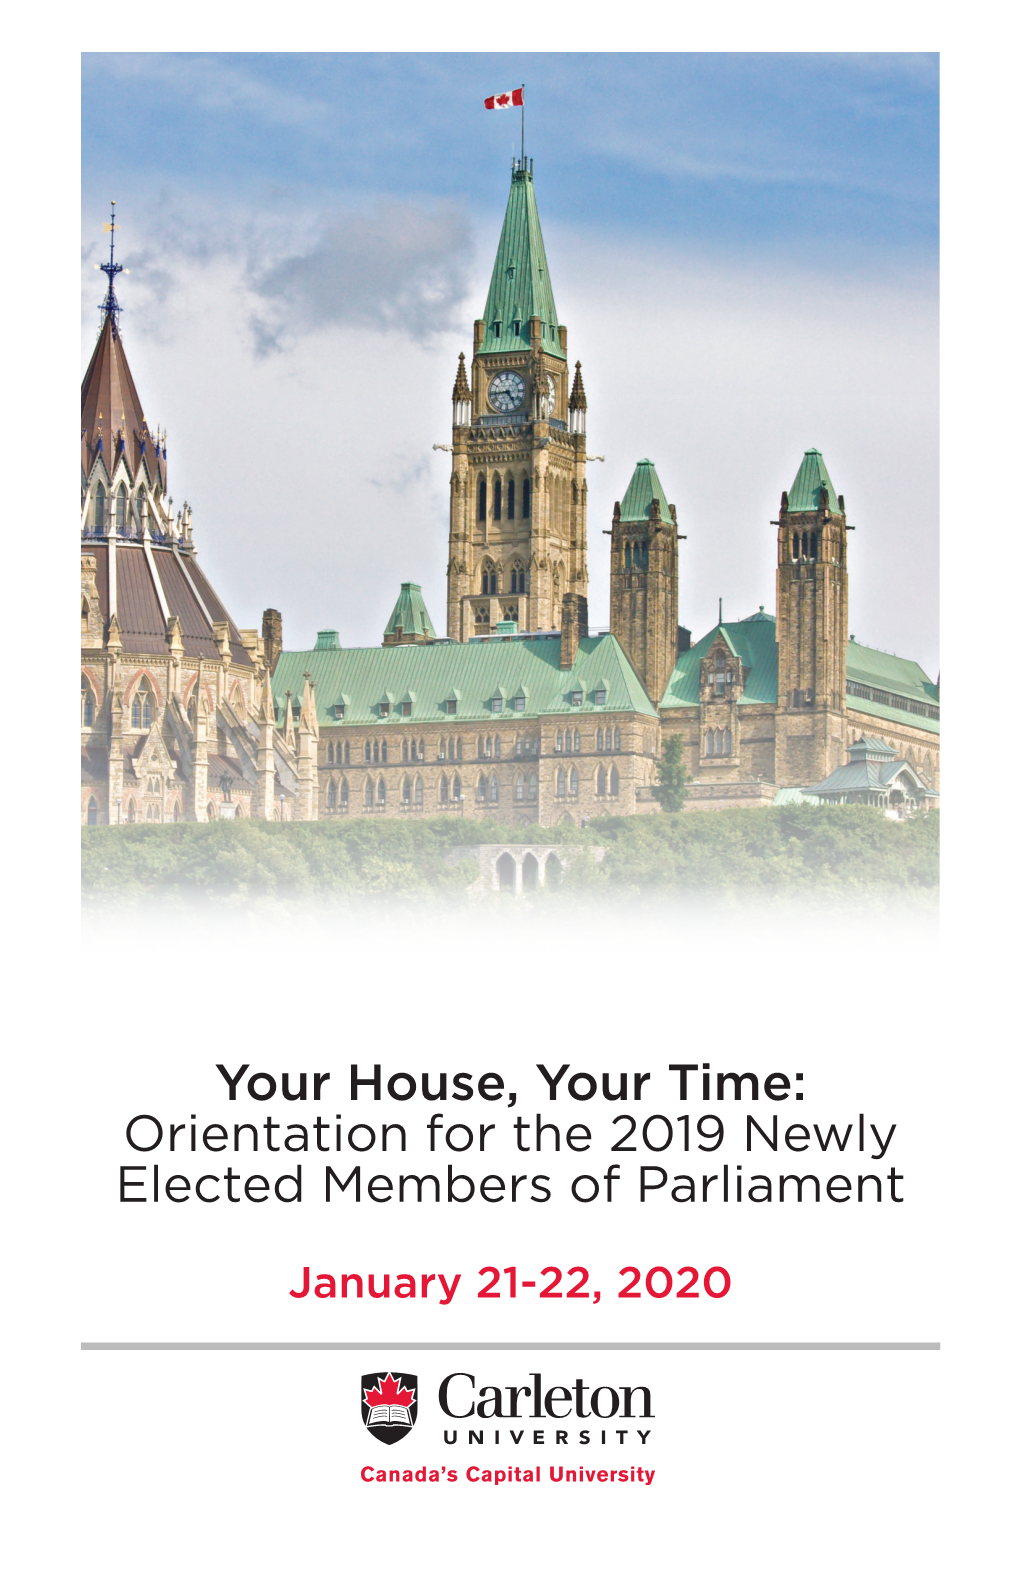 Your House, Your Time: Orientation for the 2019 Newly Elected Members of Parliament